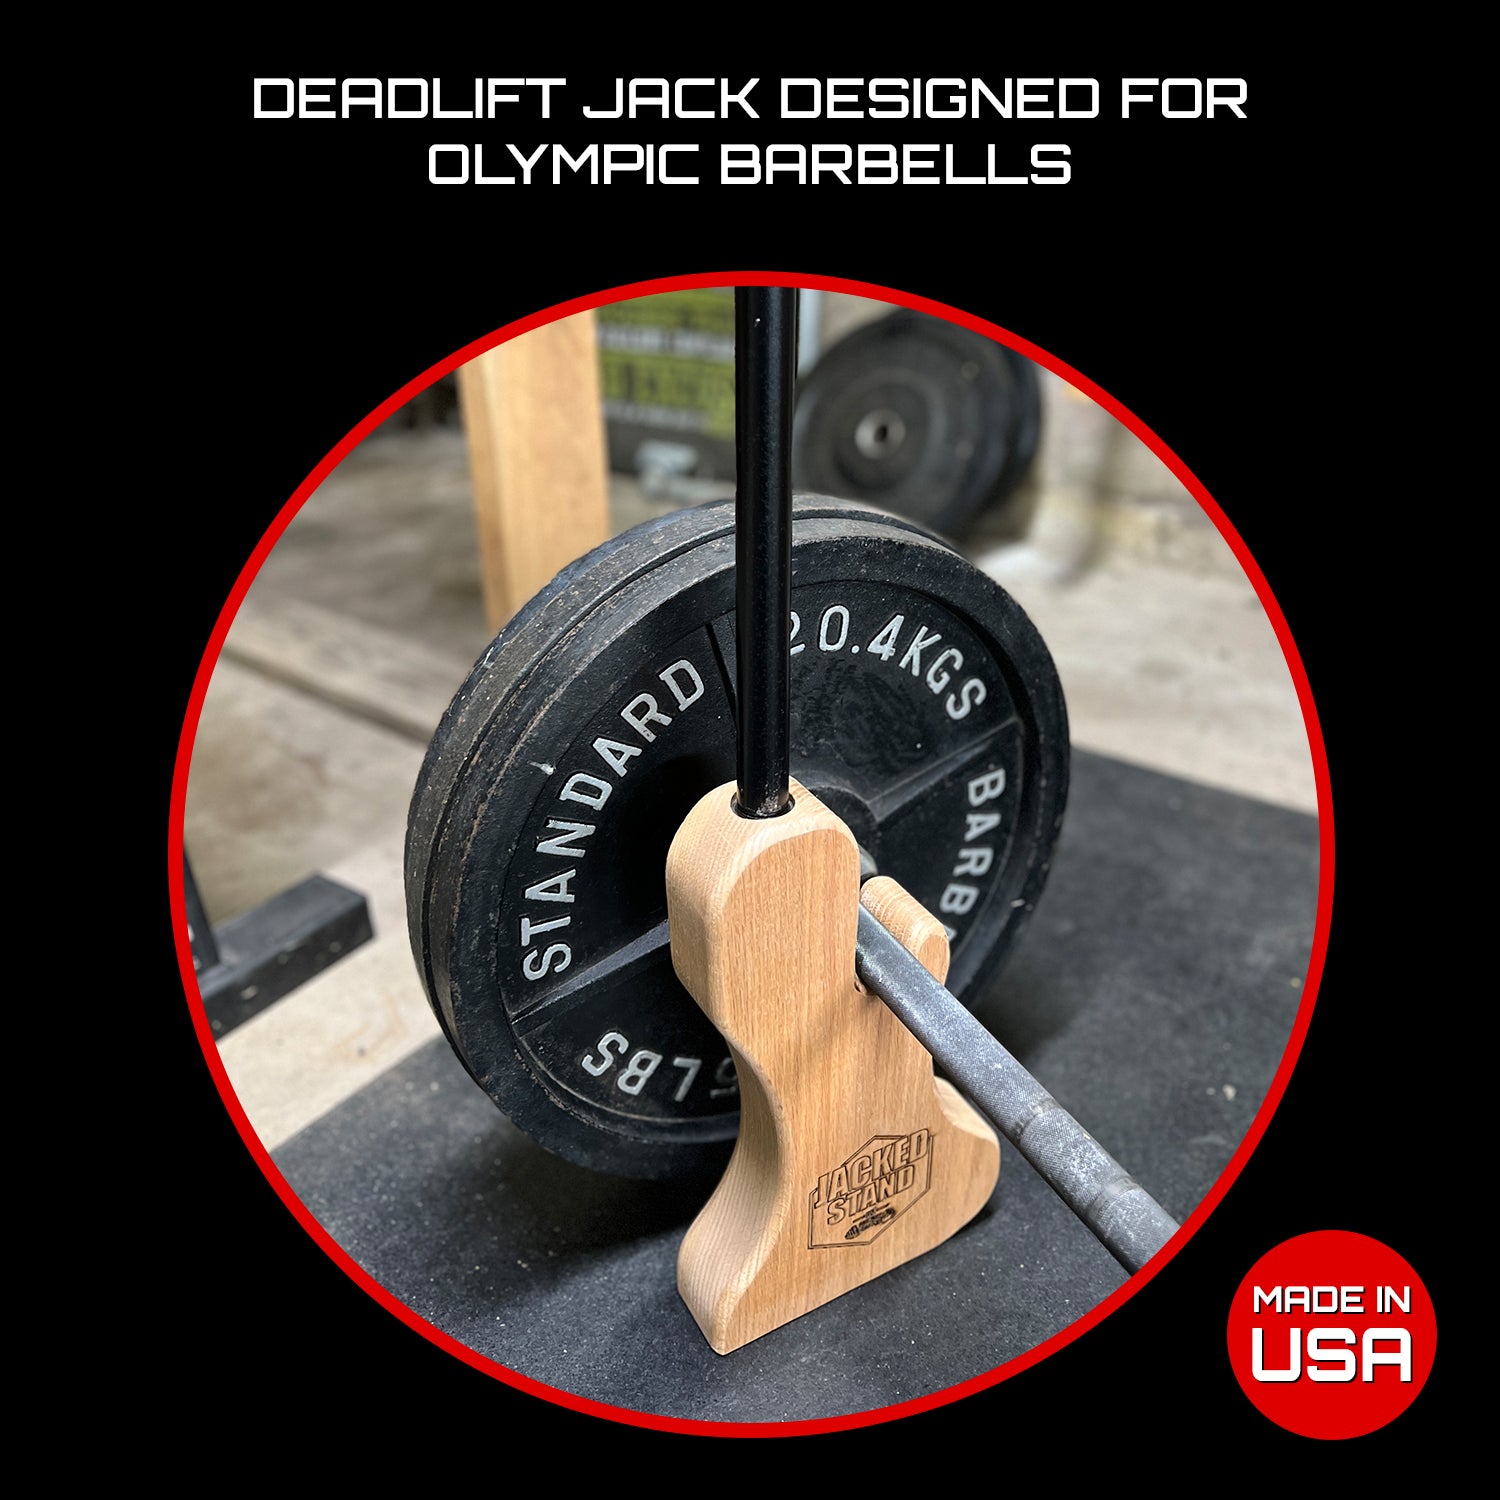 Jacked Stand by Micro Gainz Wooden Deadlift Jack, Used for Olympic Barbells